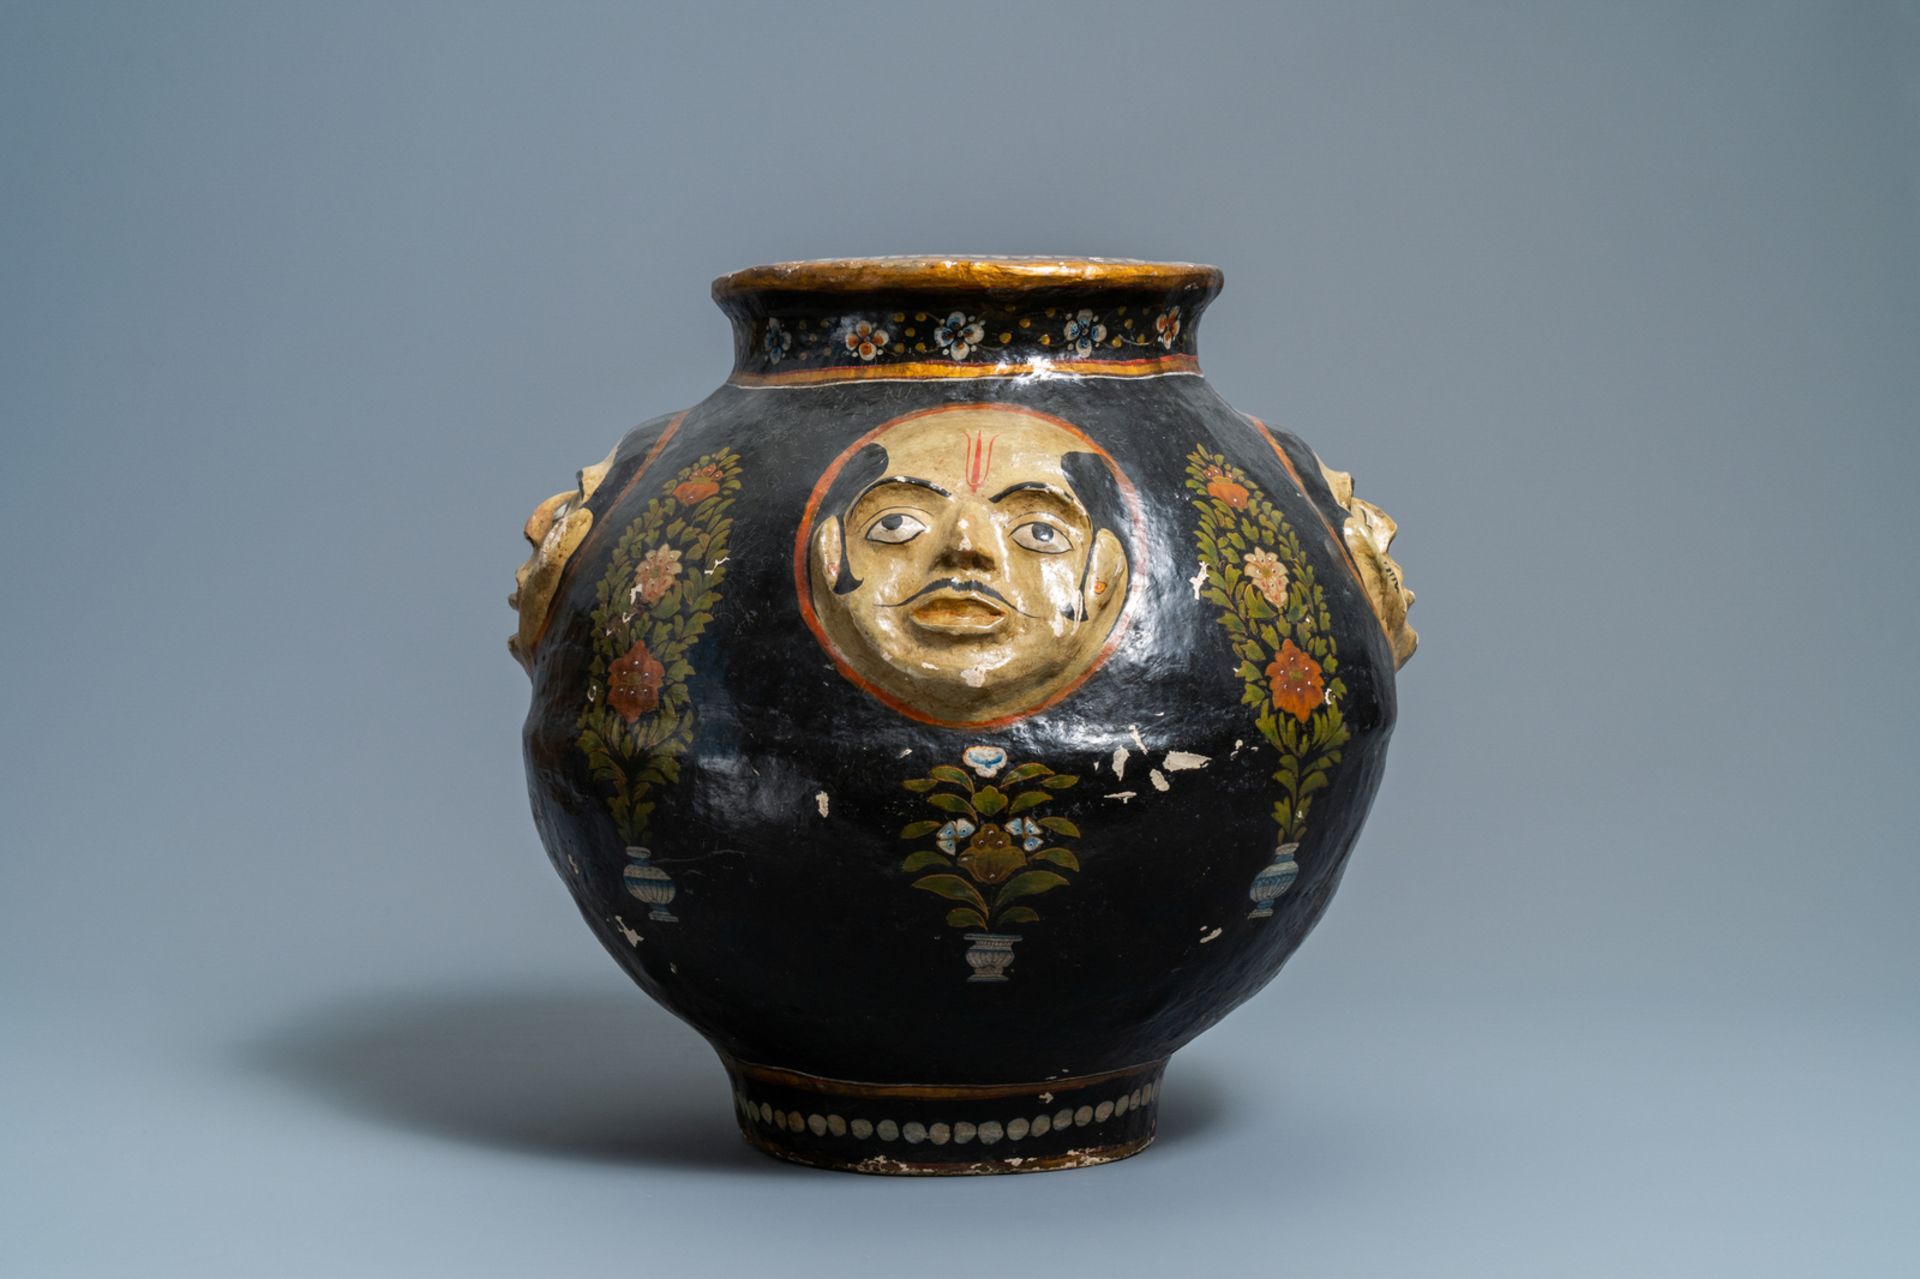 A relief-decorated papier-mache vase with four faces, Kashmir, India, 19th C. - Image 5 of 8